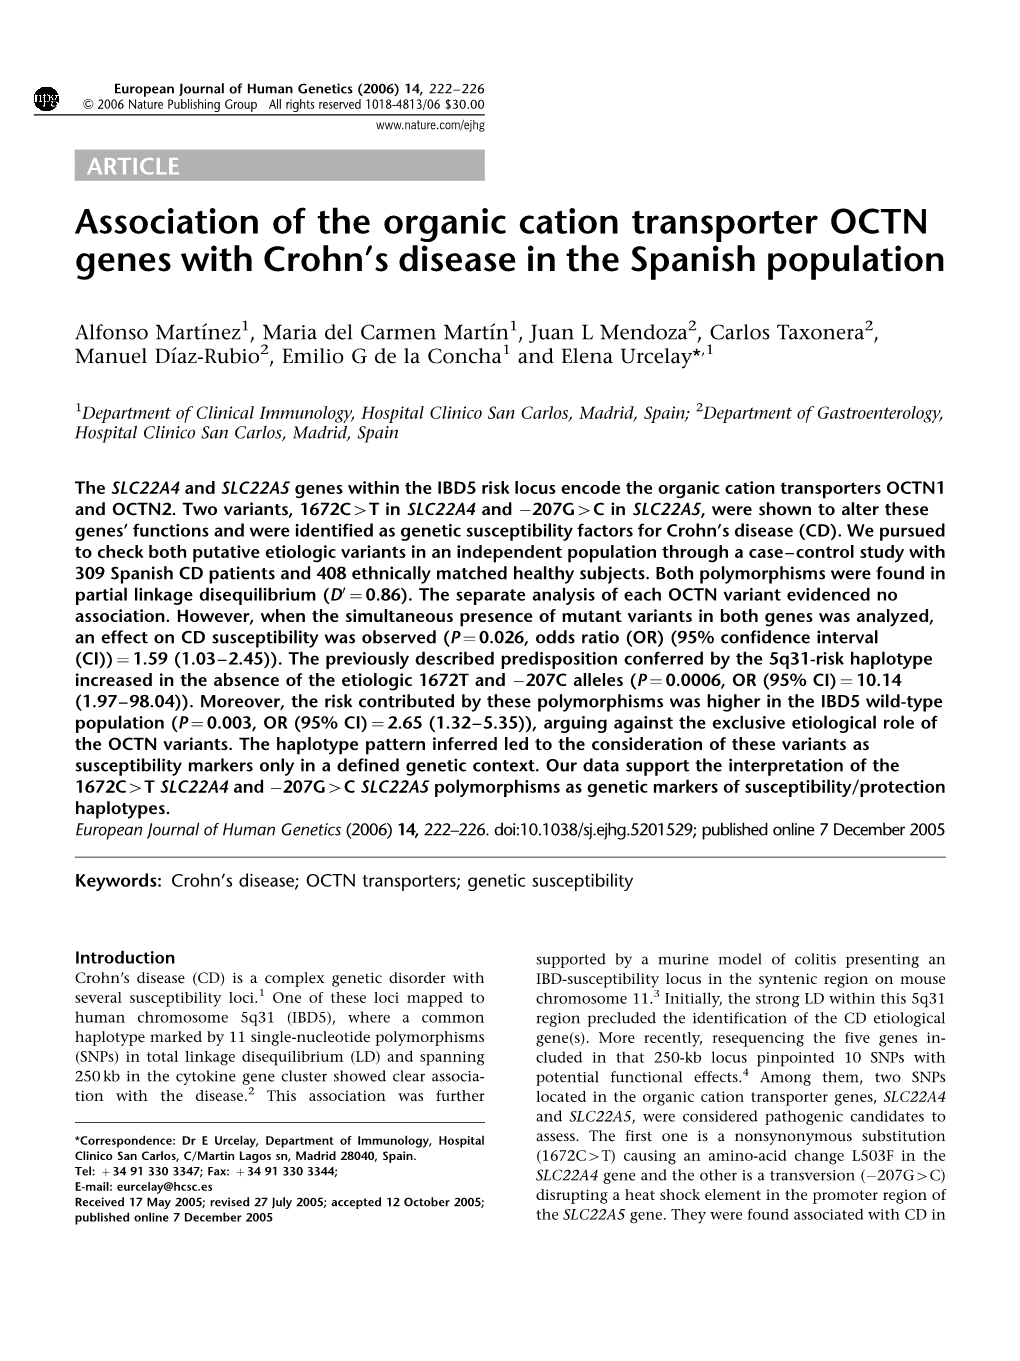 Association of the Organic Cation Transporter OCTN Genes with Crohn’S Disease in the Spanish Population